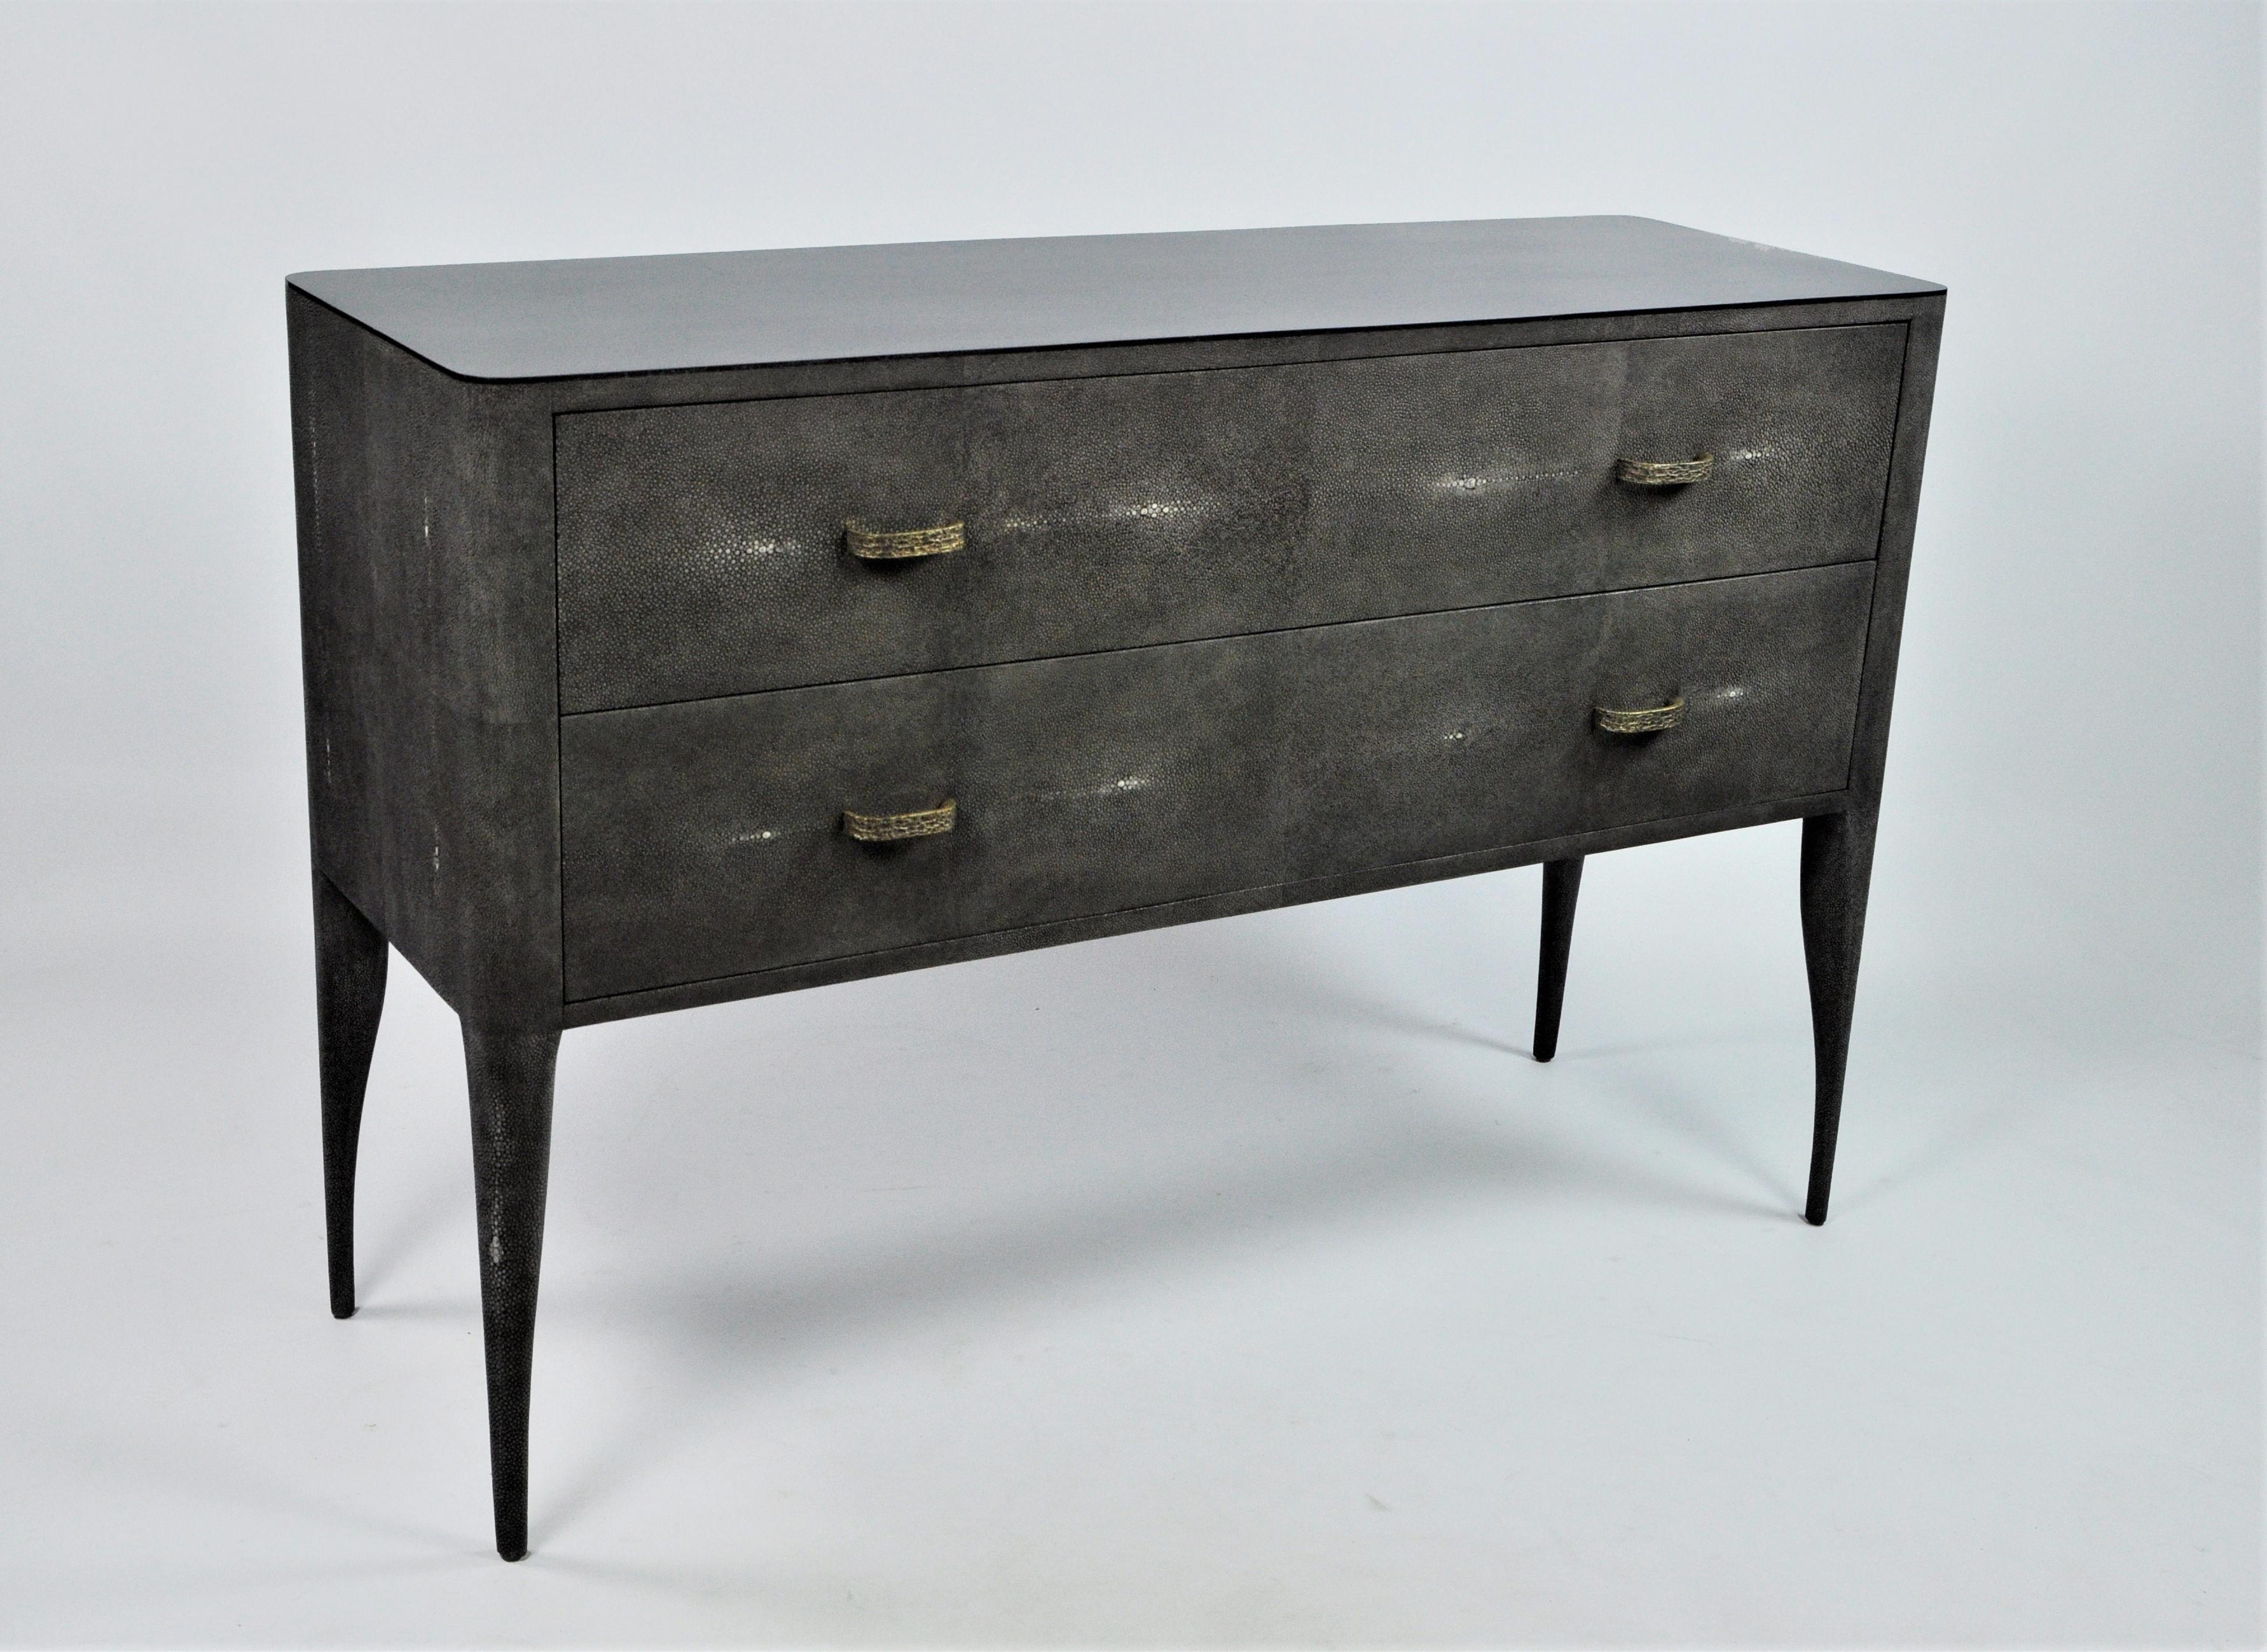 This beautiful organic chest of drawers is made of dark grey shagreen (our ref CARBON).
It has 2 drawers, and the top is inlaid with a polished black stone marquetry.
The drawers have lost wax cast brass handles, with a hammered texture.

A